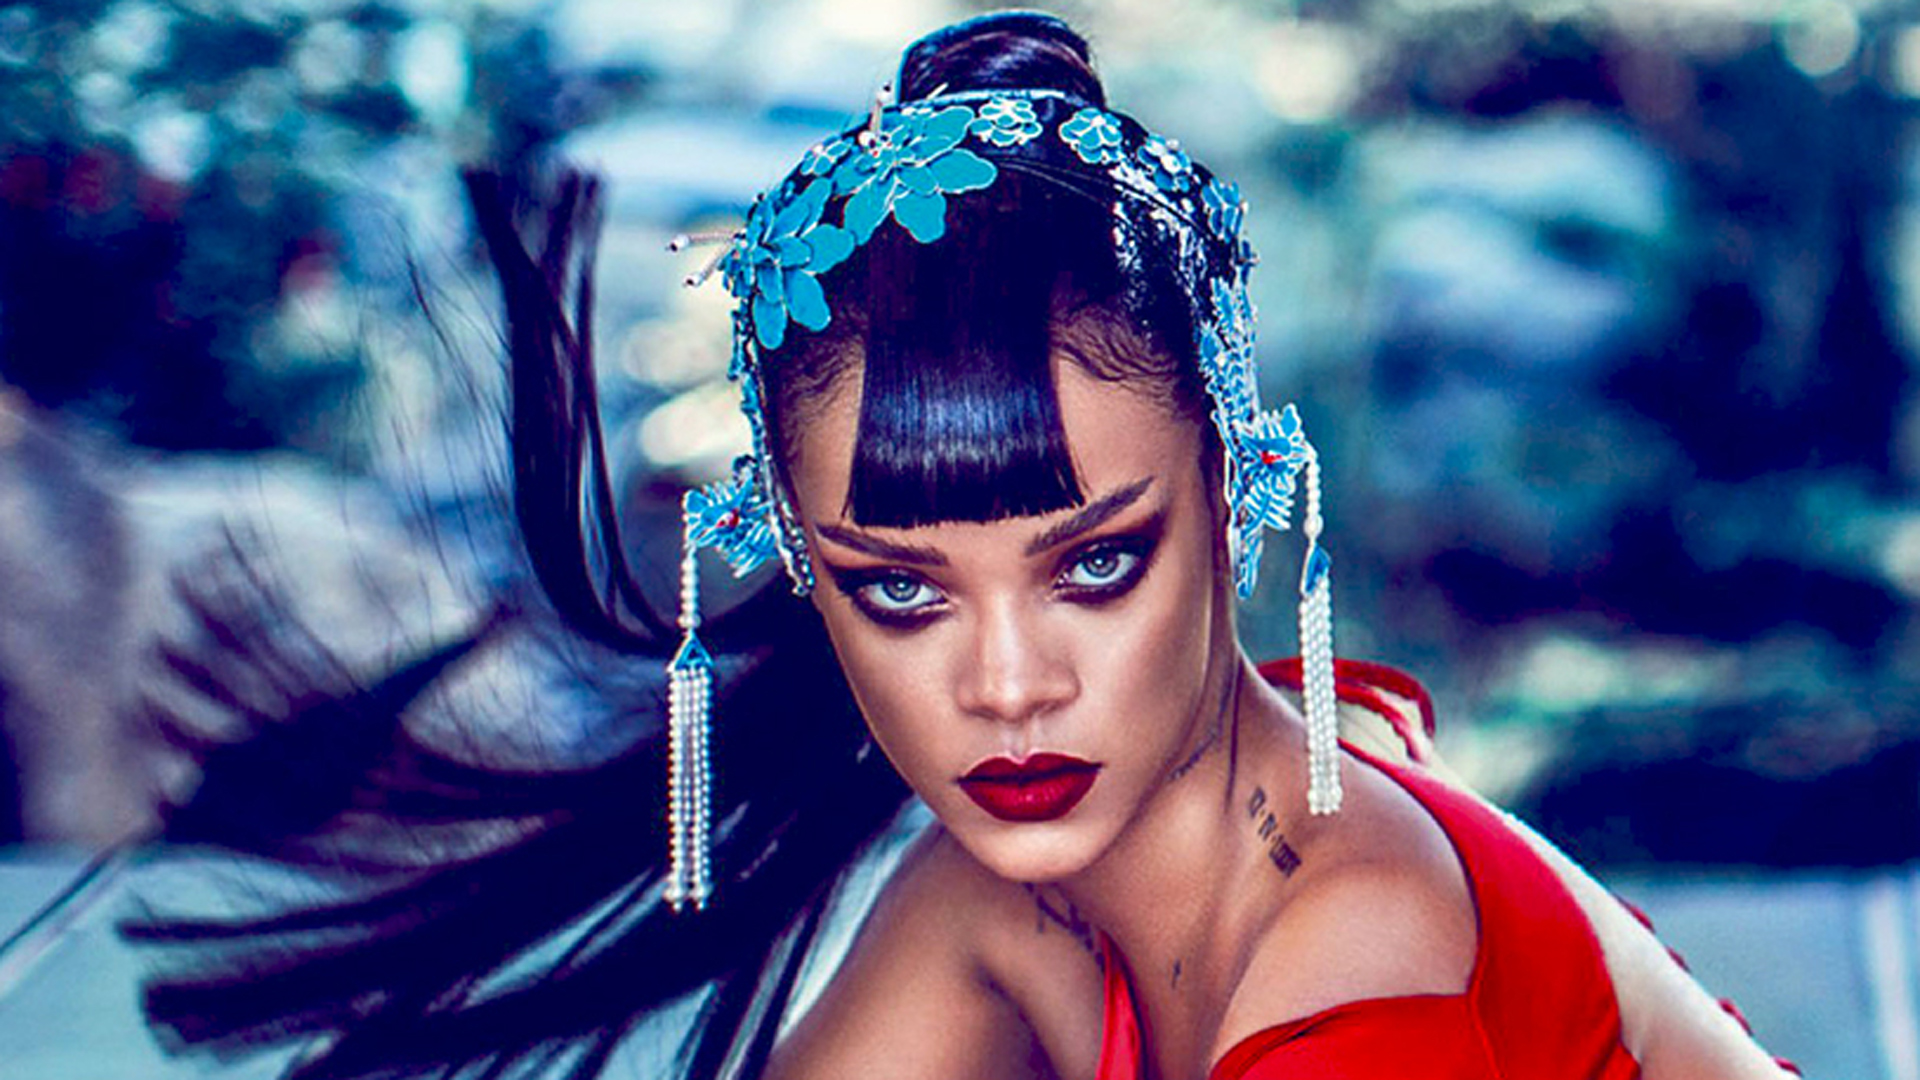 Check Out The Rihanna HD Wallpaper And High Definition